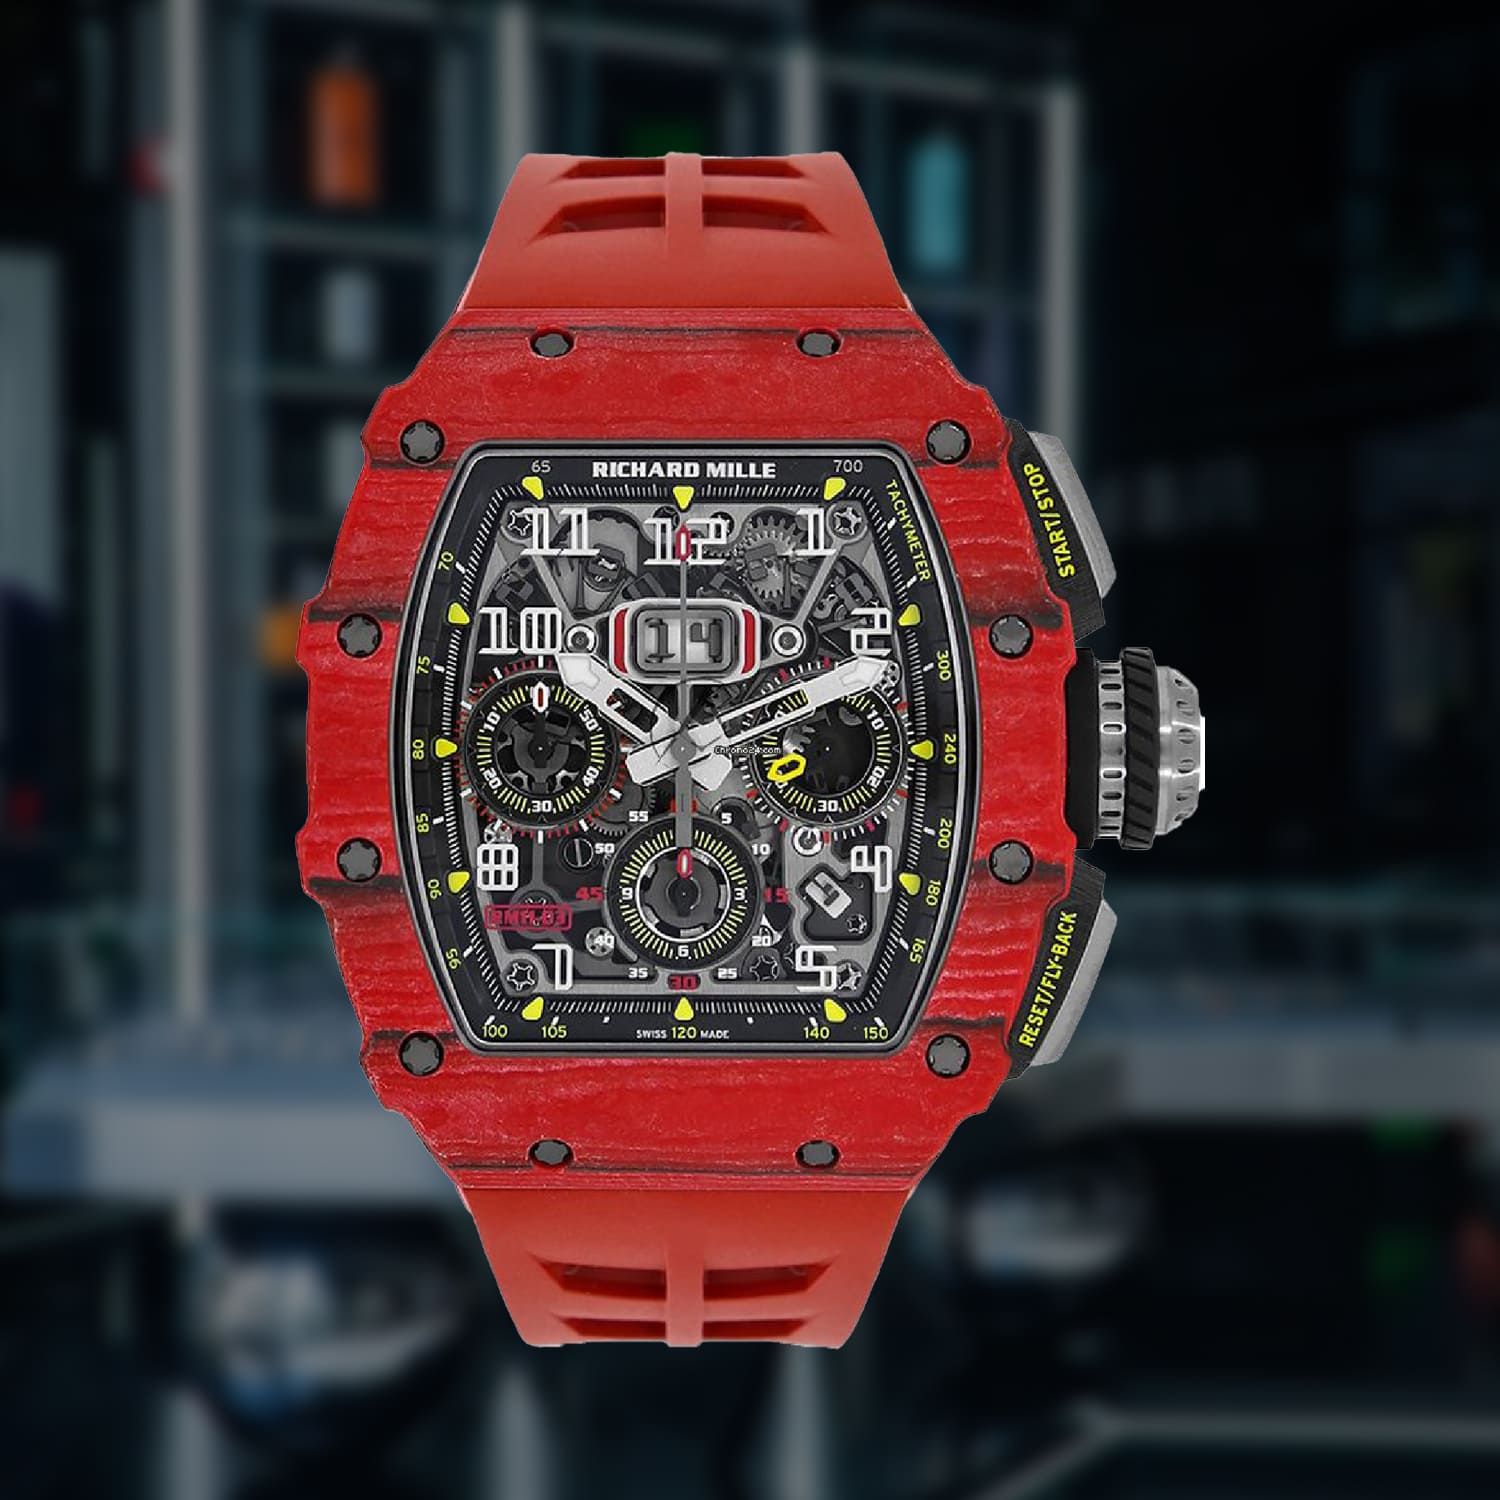 Richard Mille RM11-03 | The Watch Meister